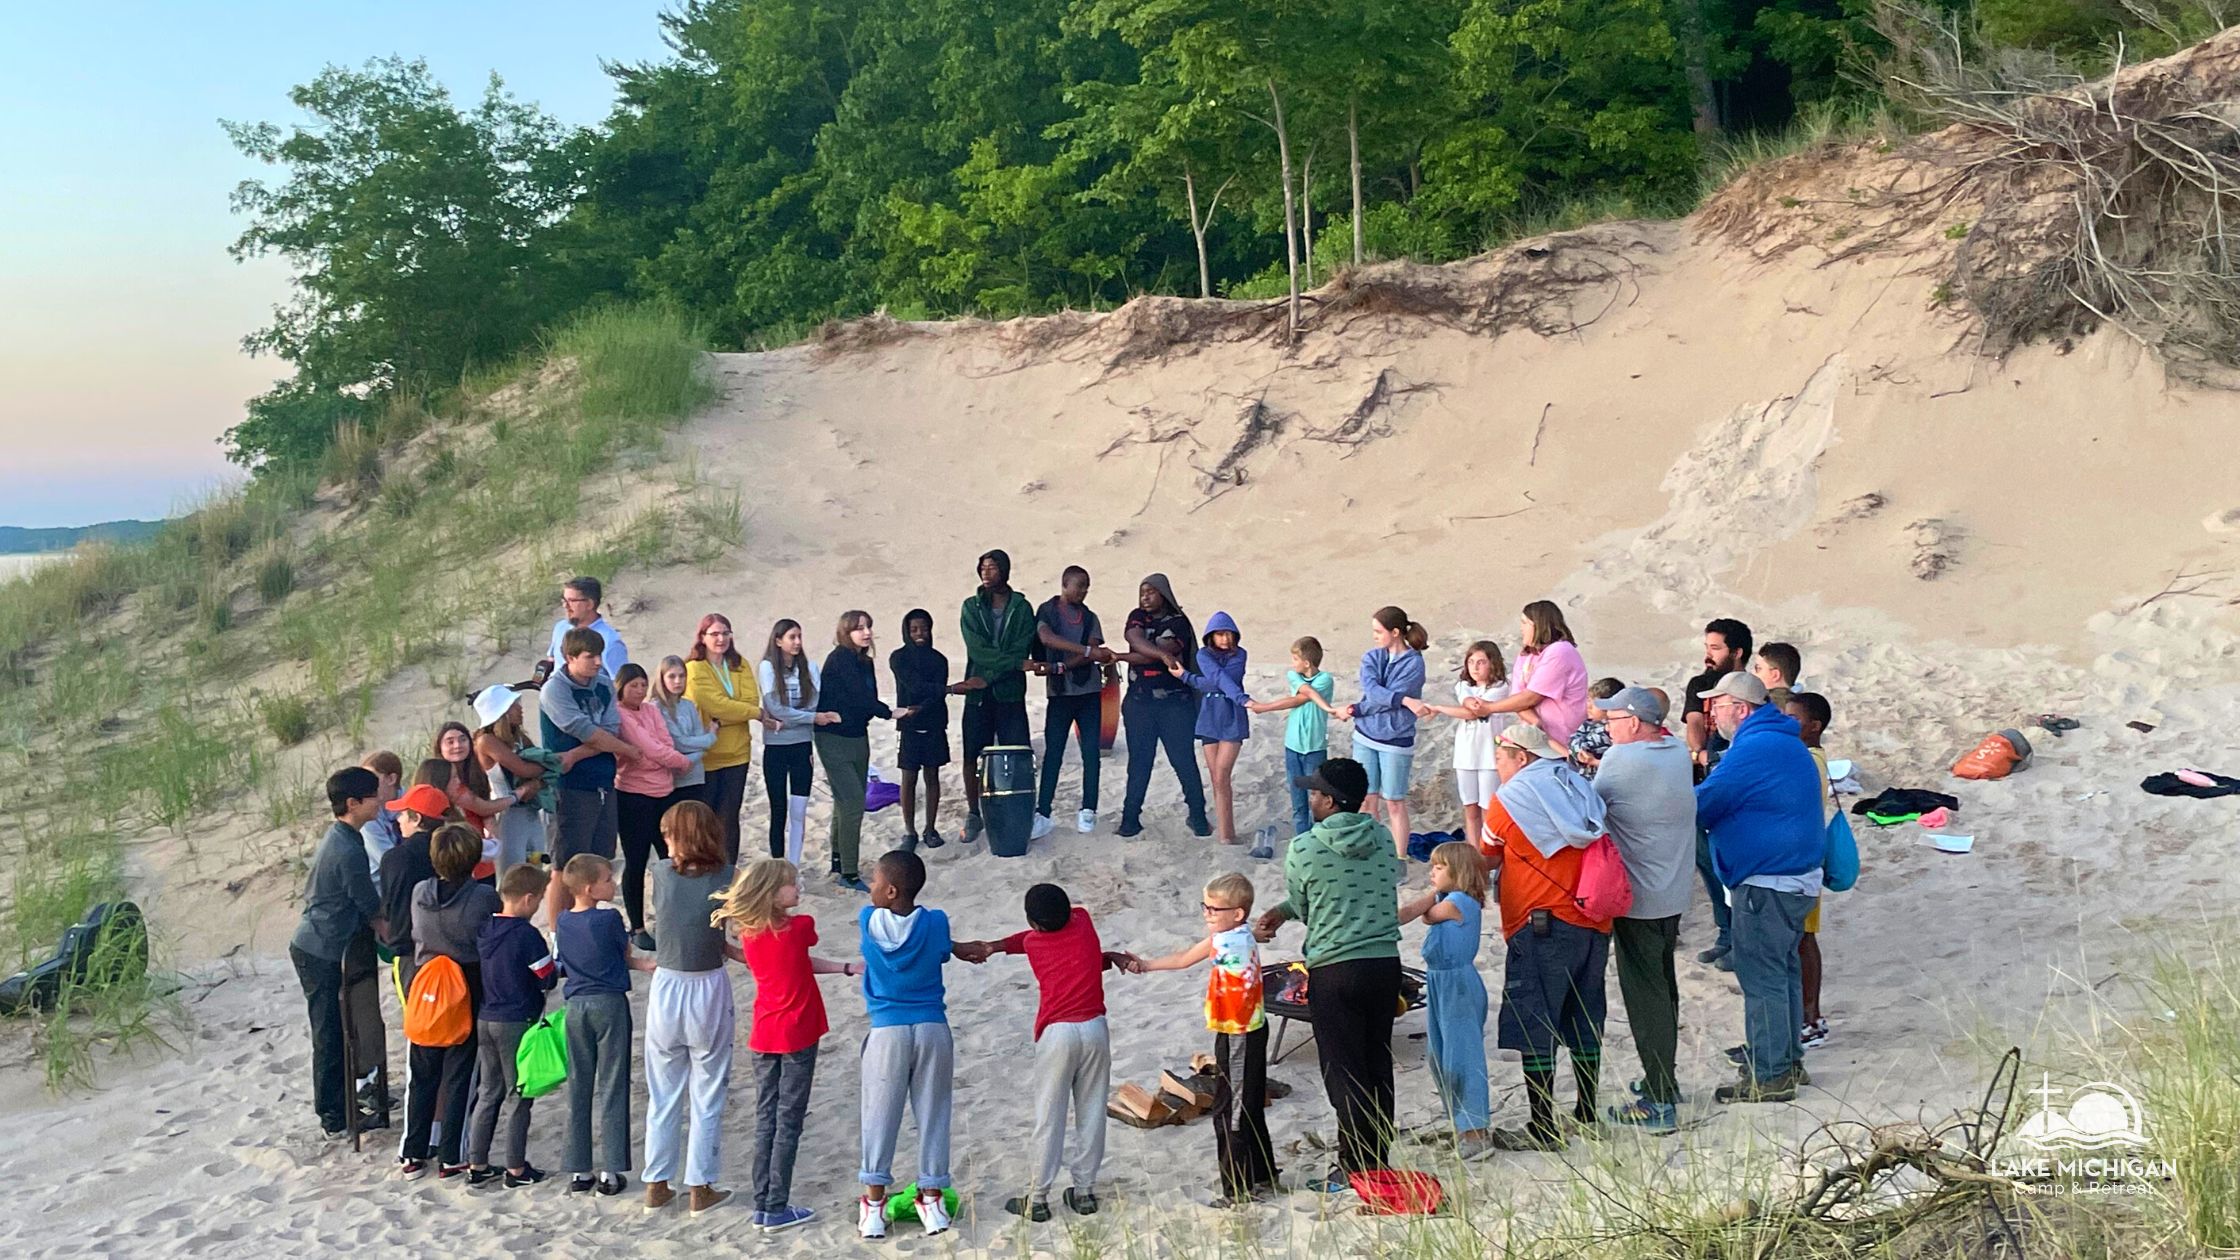 Children of all ages and races join hands with each other and adult counselors on the sand near the shore of Lake Michigan and Lake Michigan Camp & Retreat.